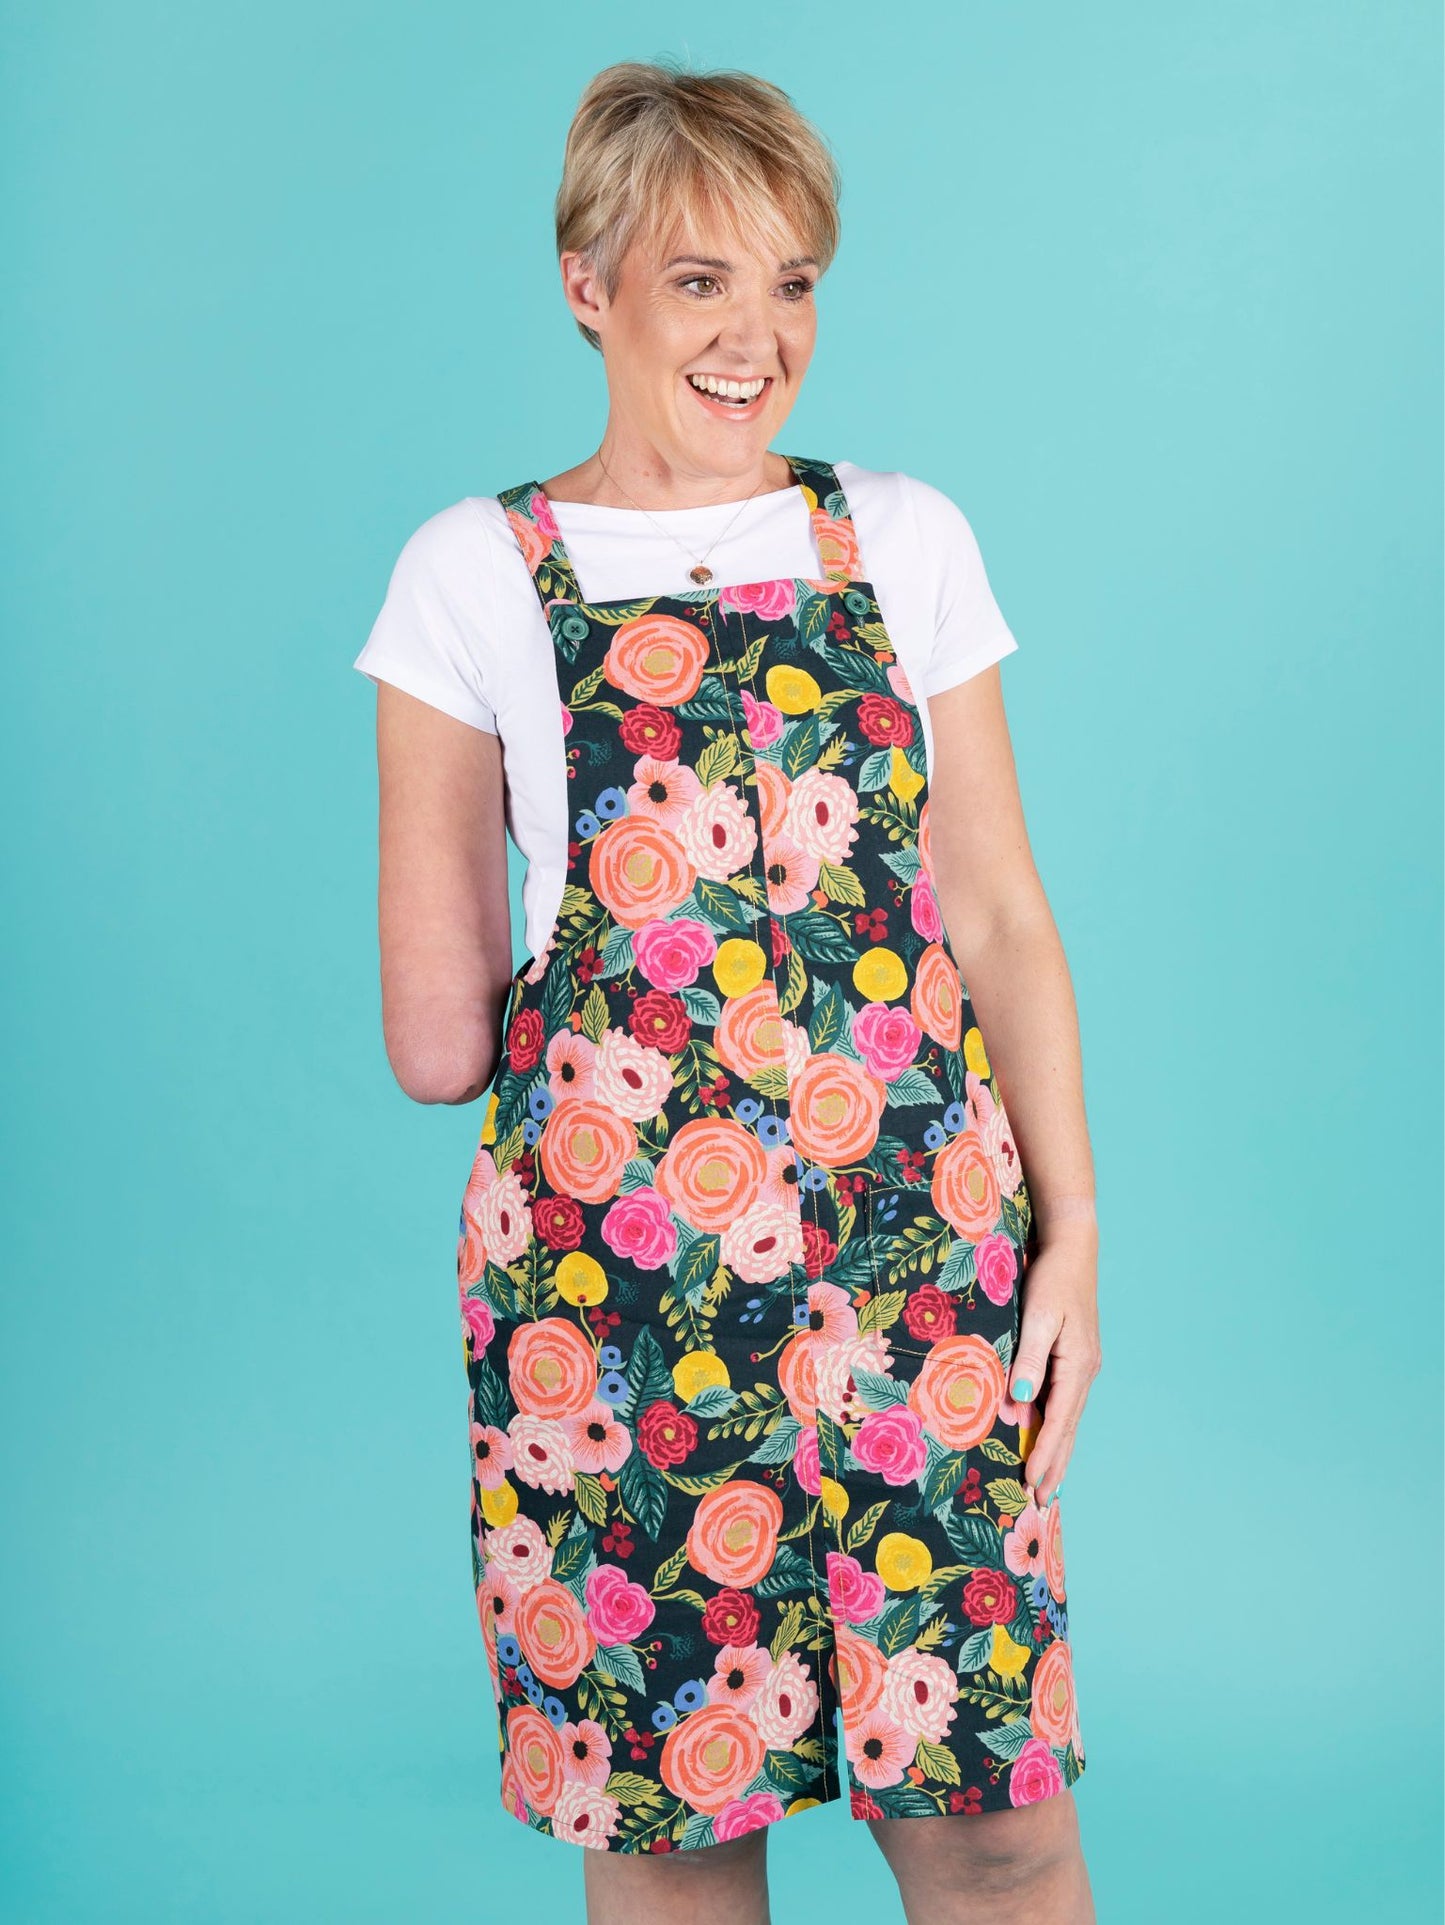 Tilly and the Buttons Cleo Dungaree Dress